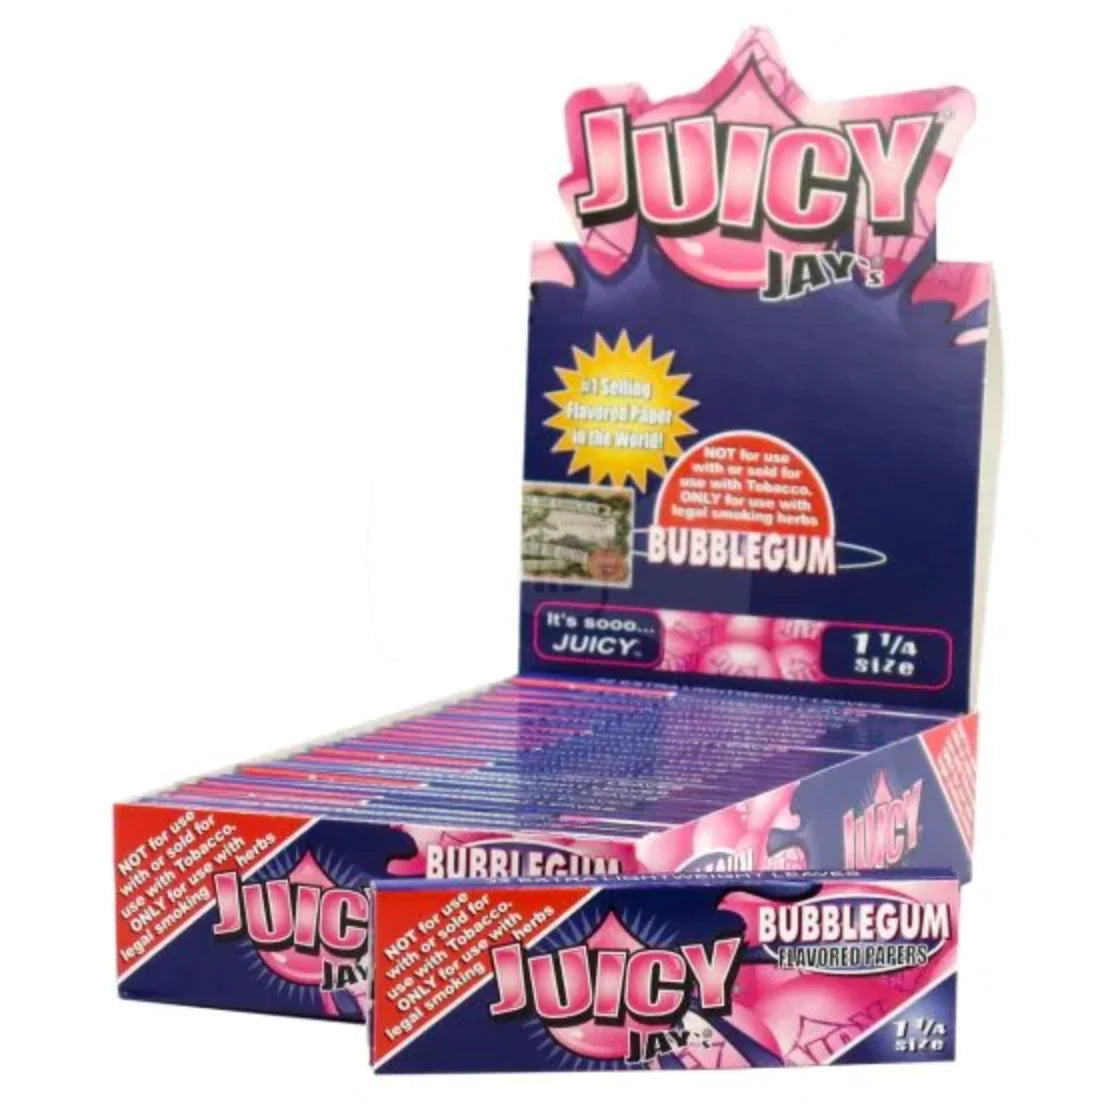 Juicy Jay’s 1 ¼ Flavored Rolling Papers Wholesale – 1 Box/ 24ct